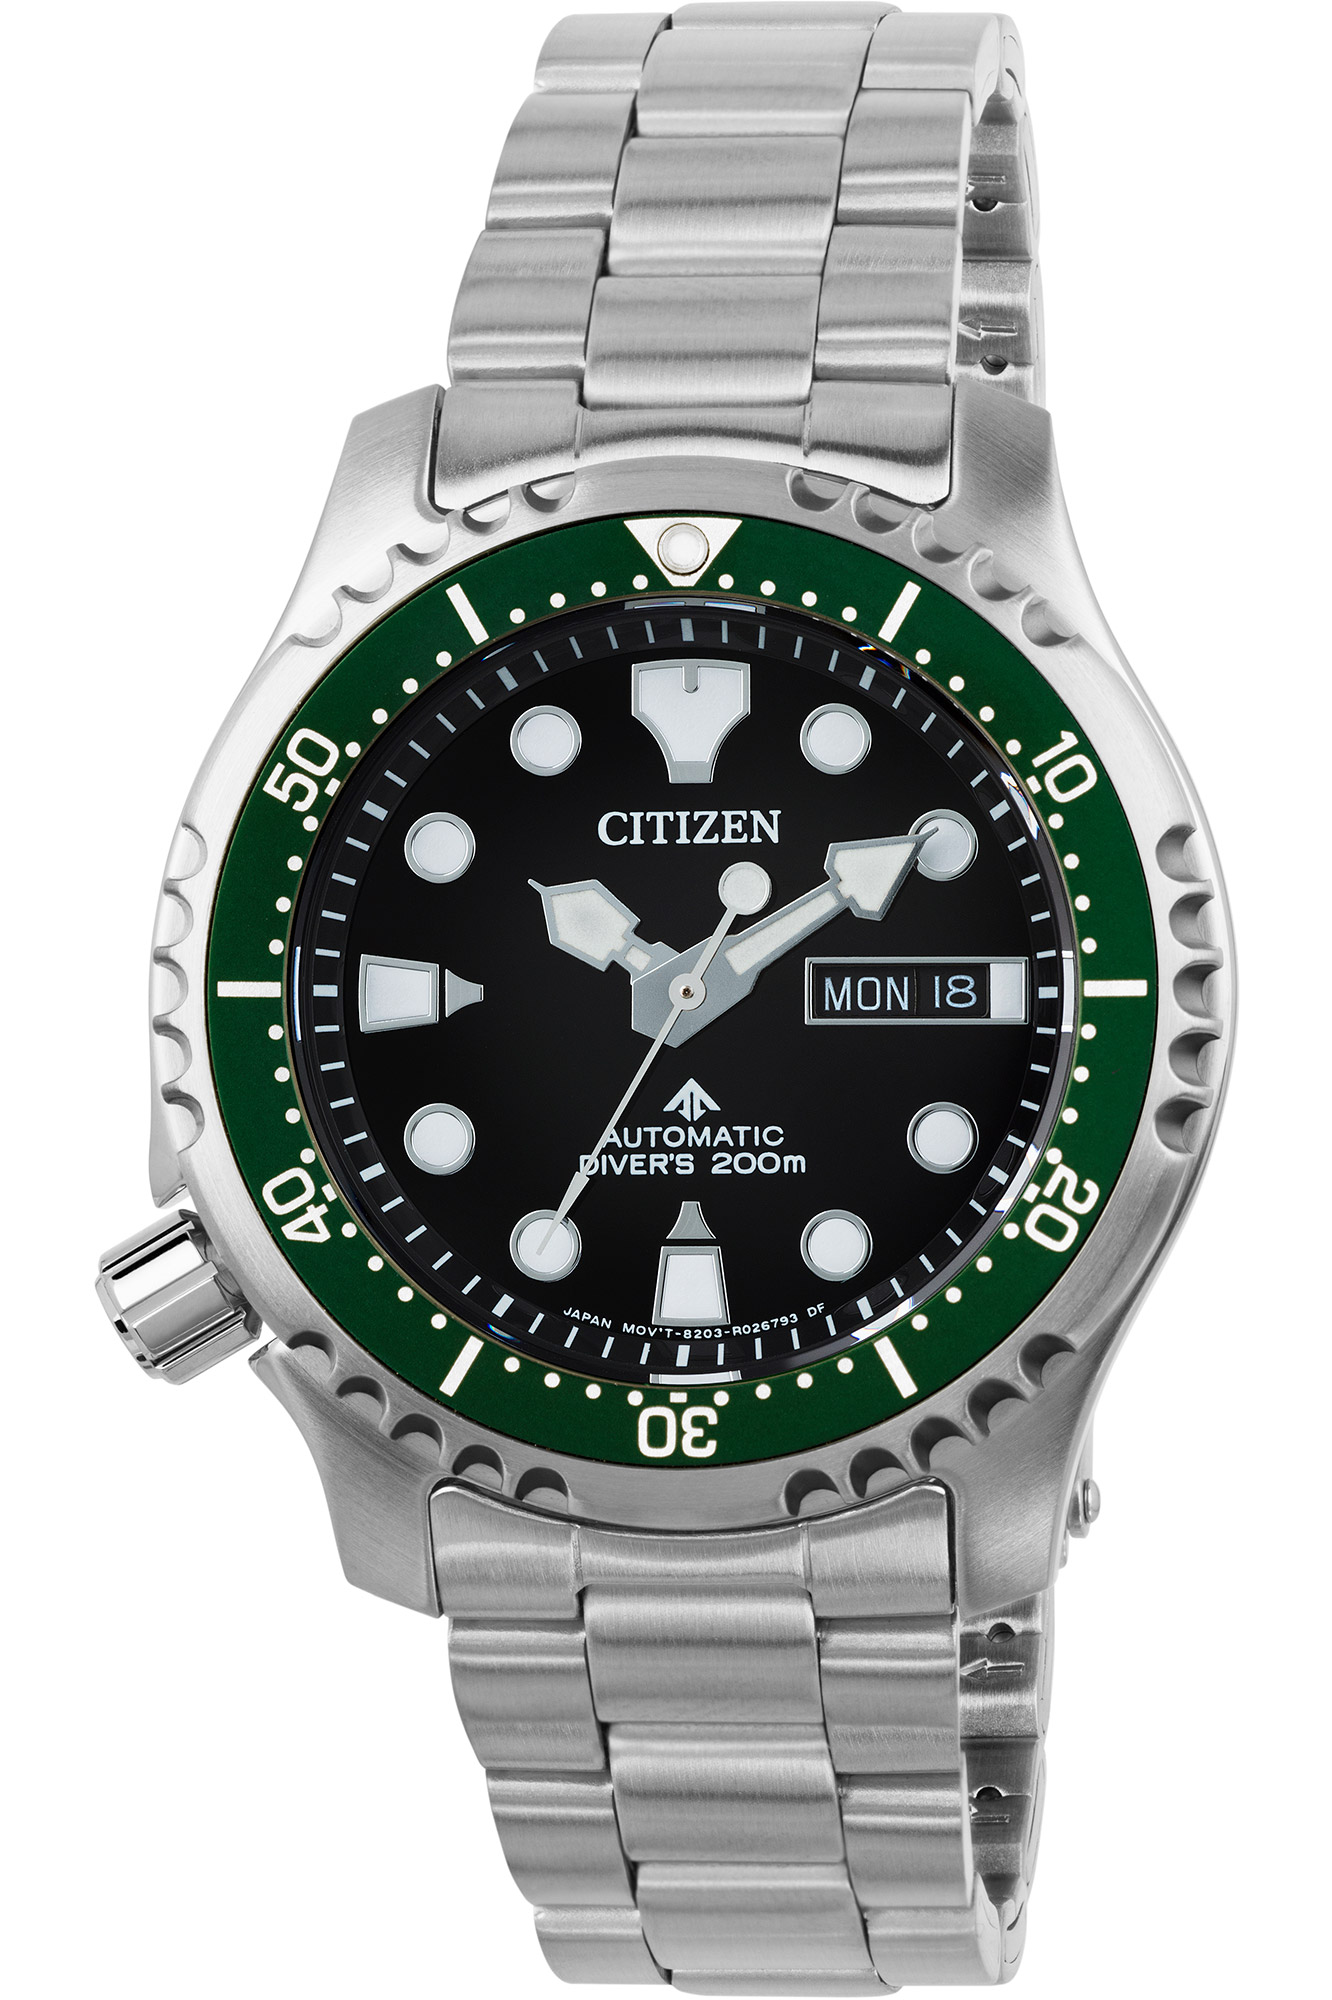 Watch Citizen ny0084-89ee